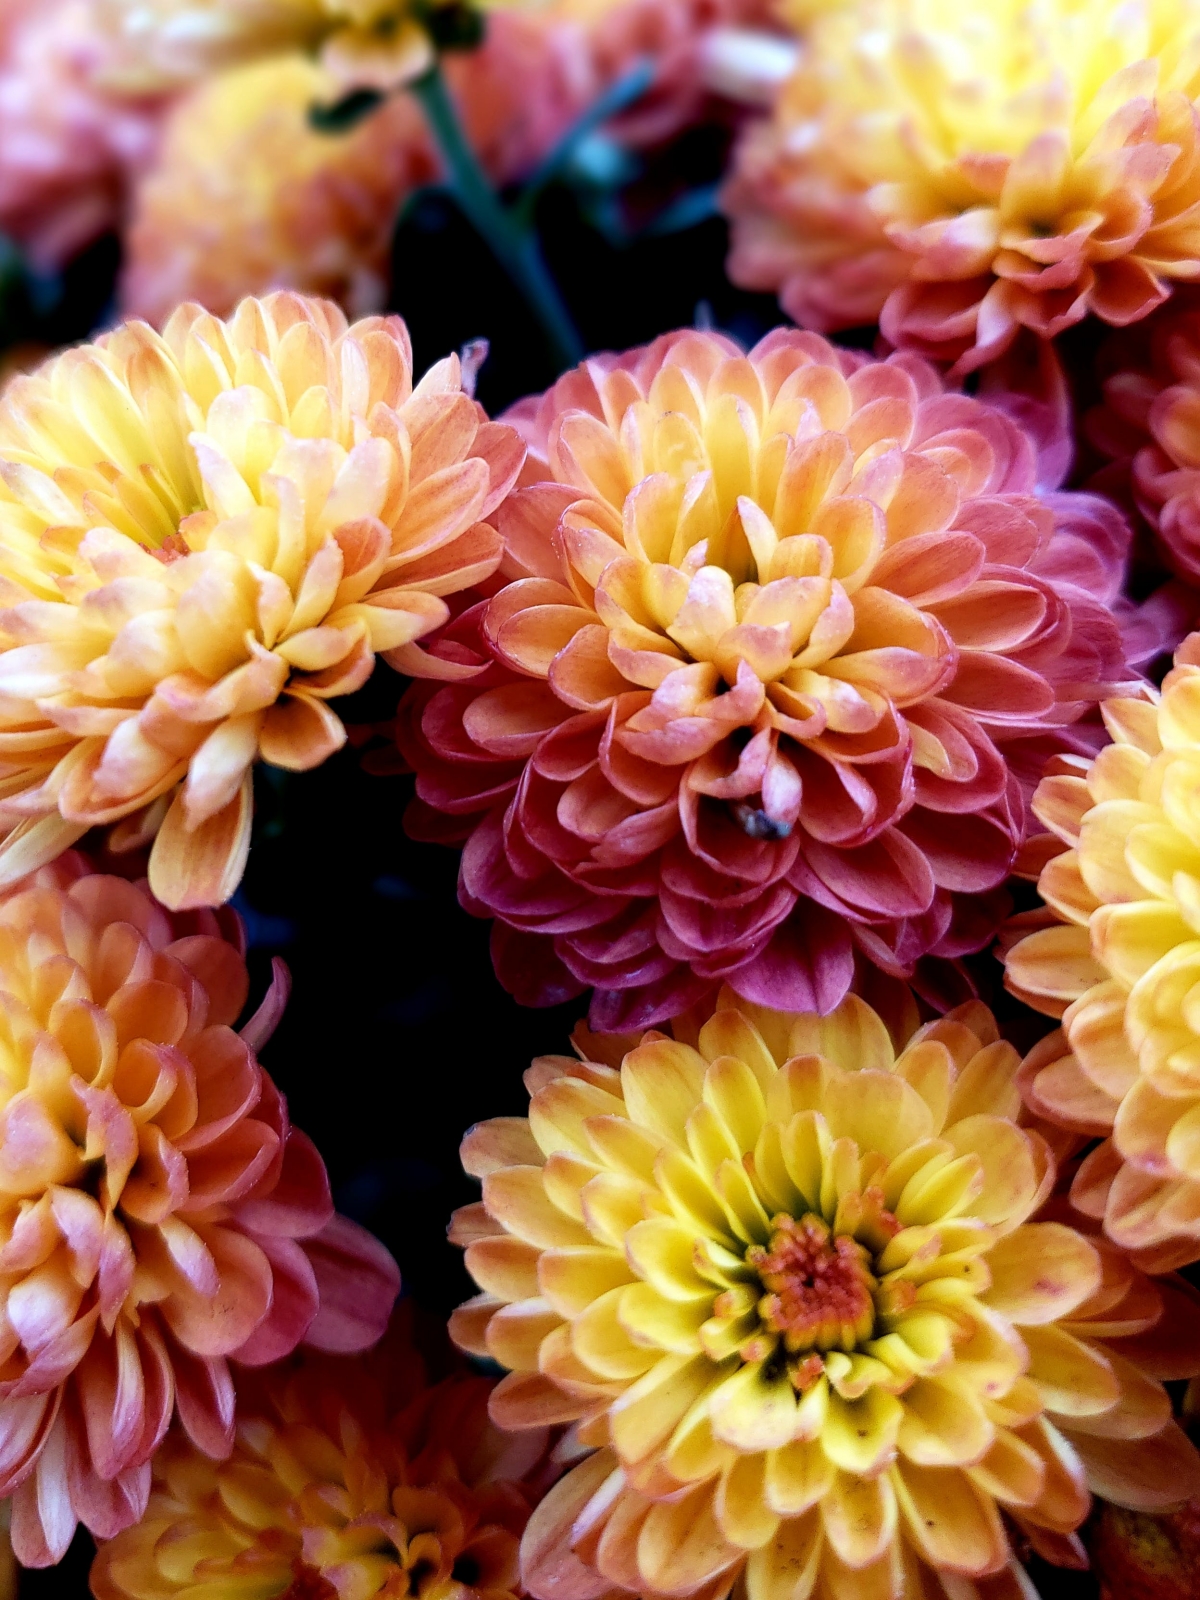 How To Winterize Mums: Key Techniques Every Gardener Should Know